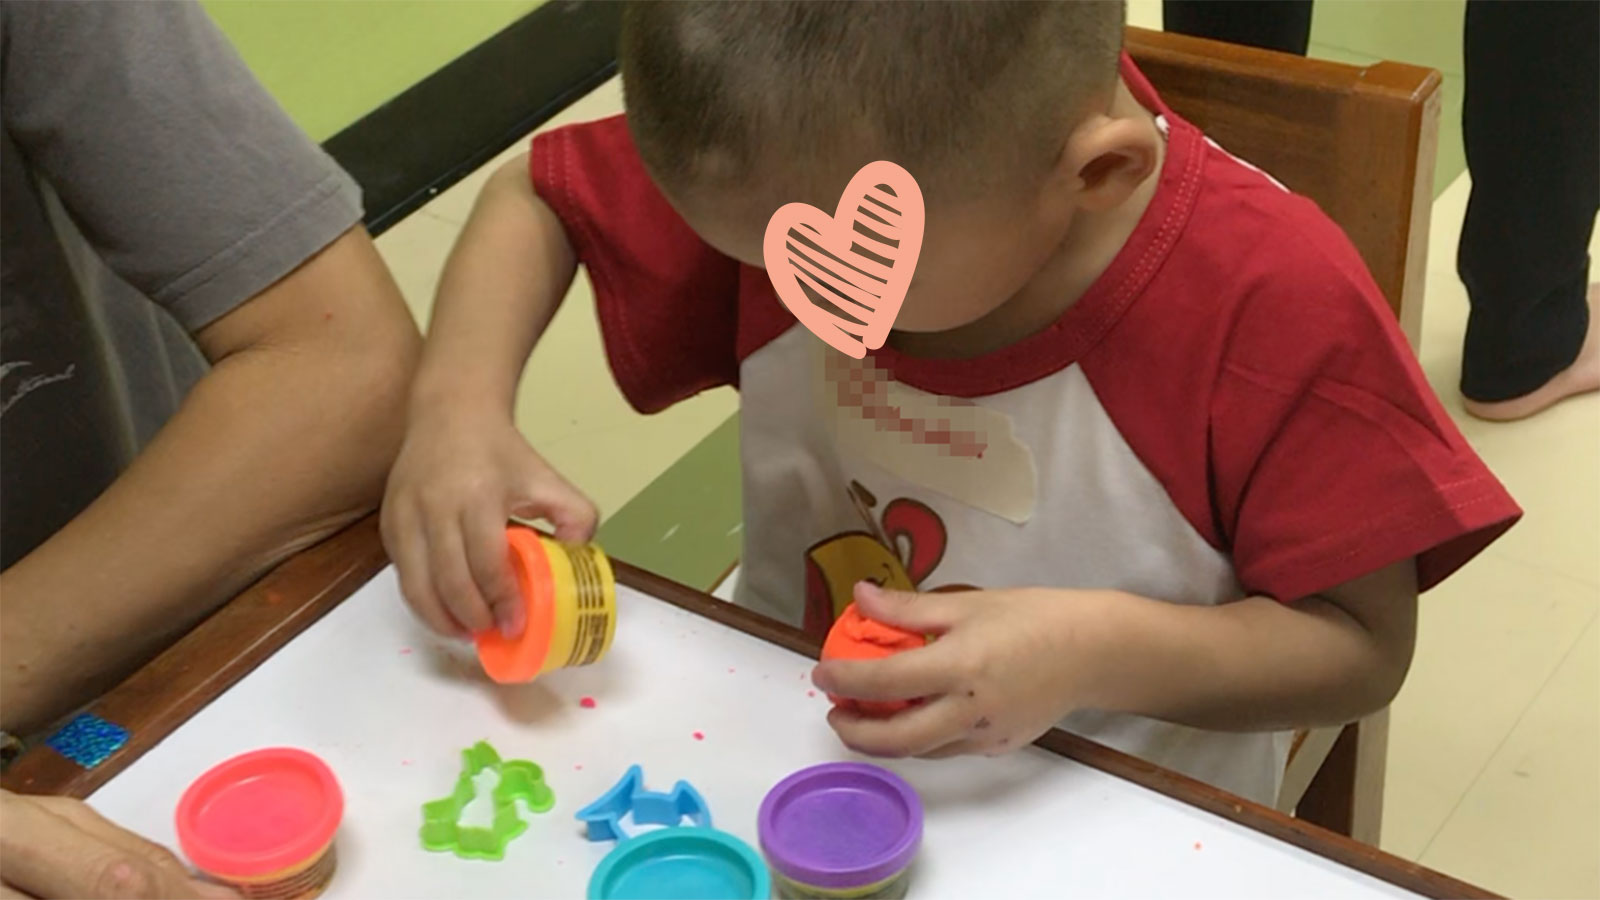 little boy playing with playdough with heart graphic covering his face